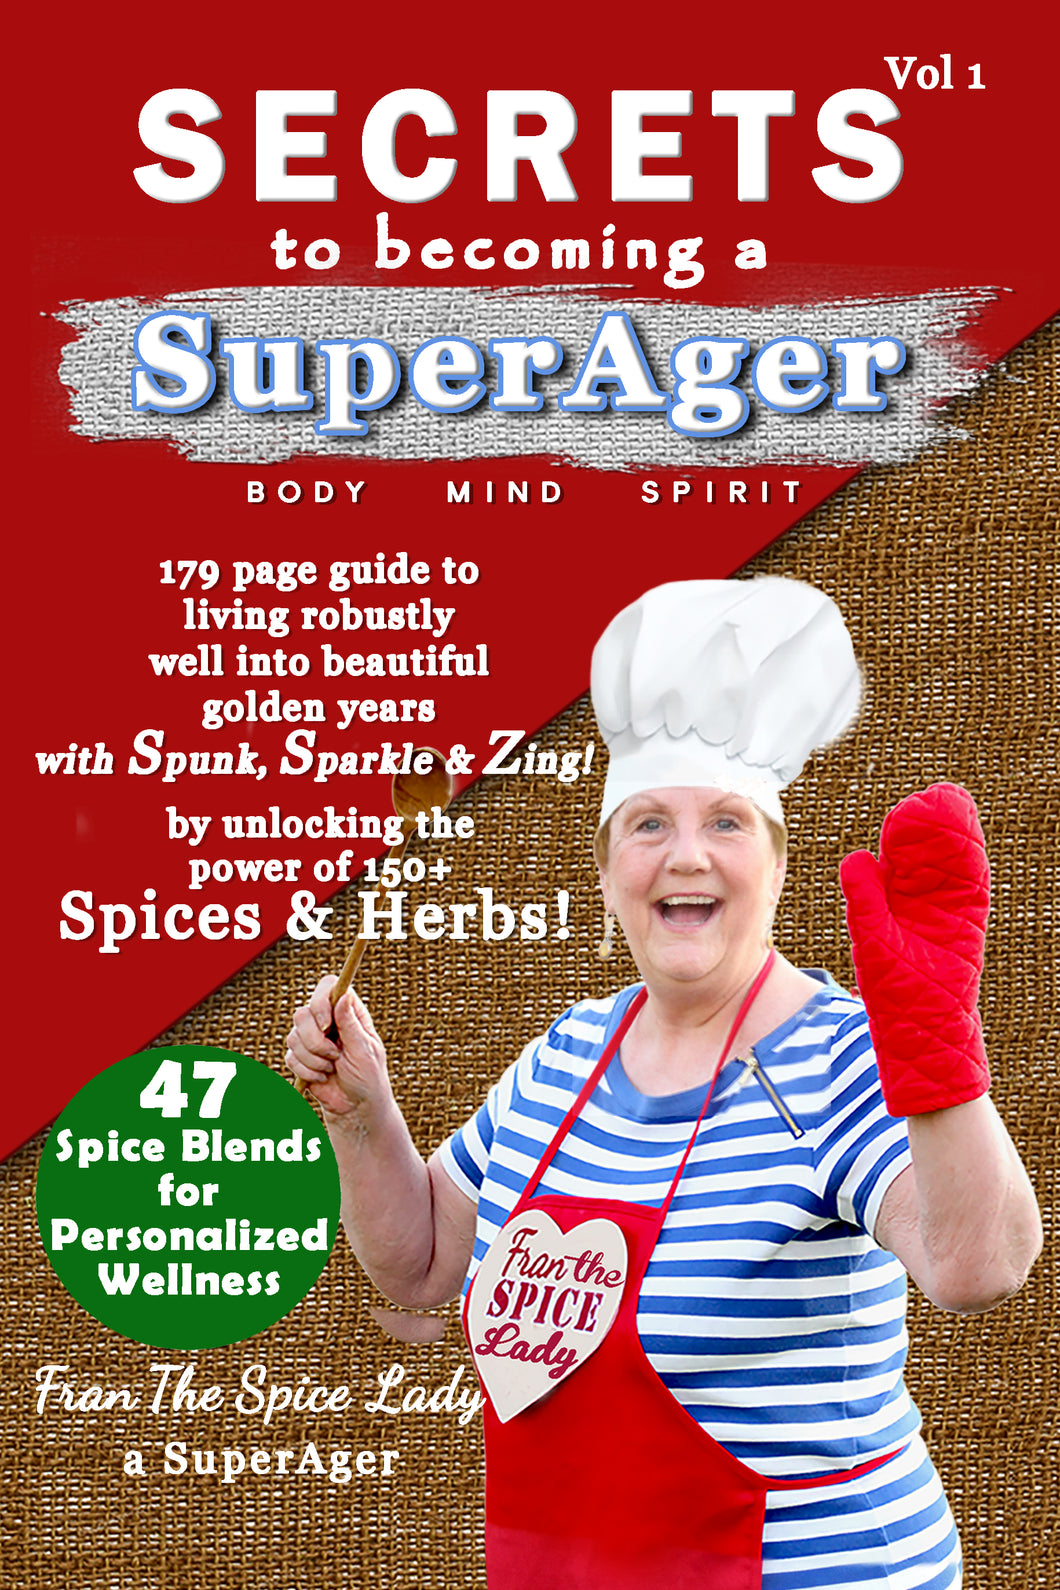 Secrets to becoming a SuperAger -1﻿79 page guide to living robustly well into beautiful golden years with Spunk, Sparkle & Zing!